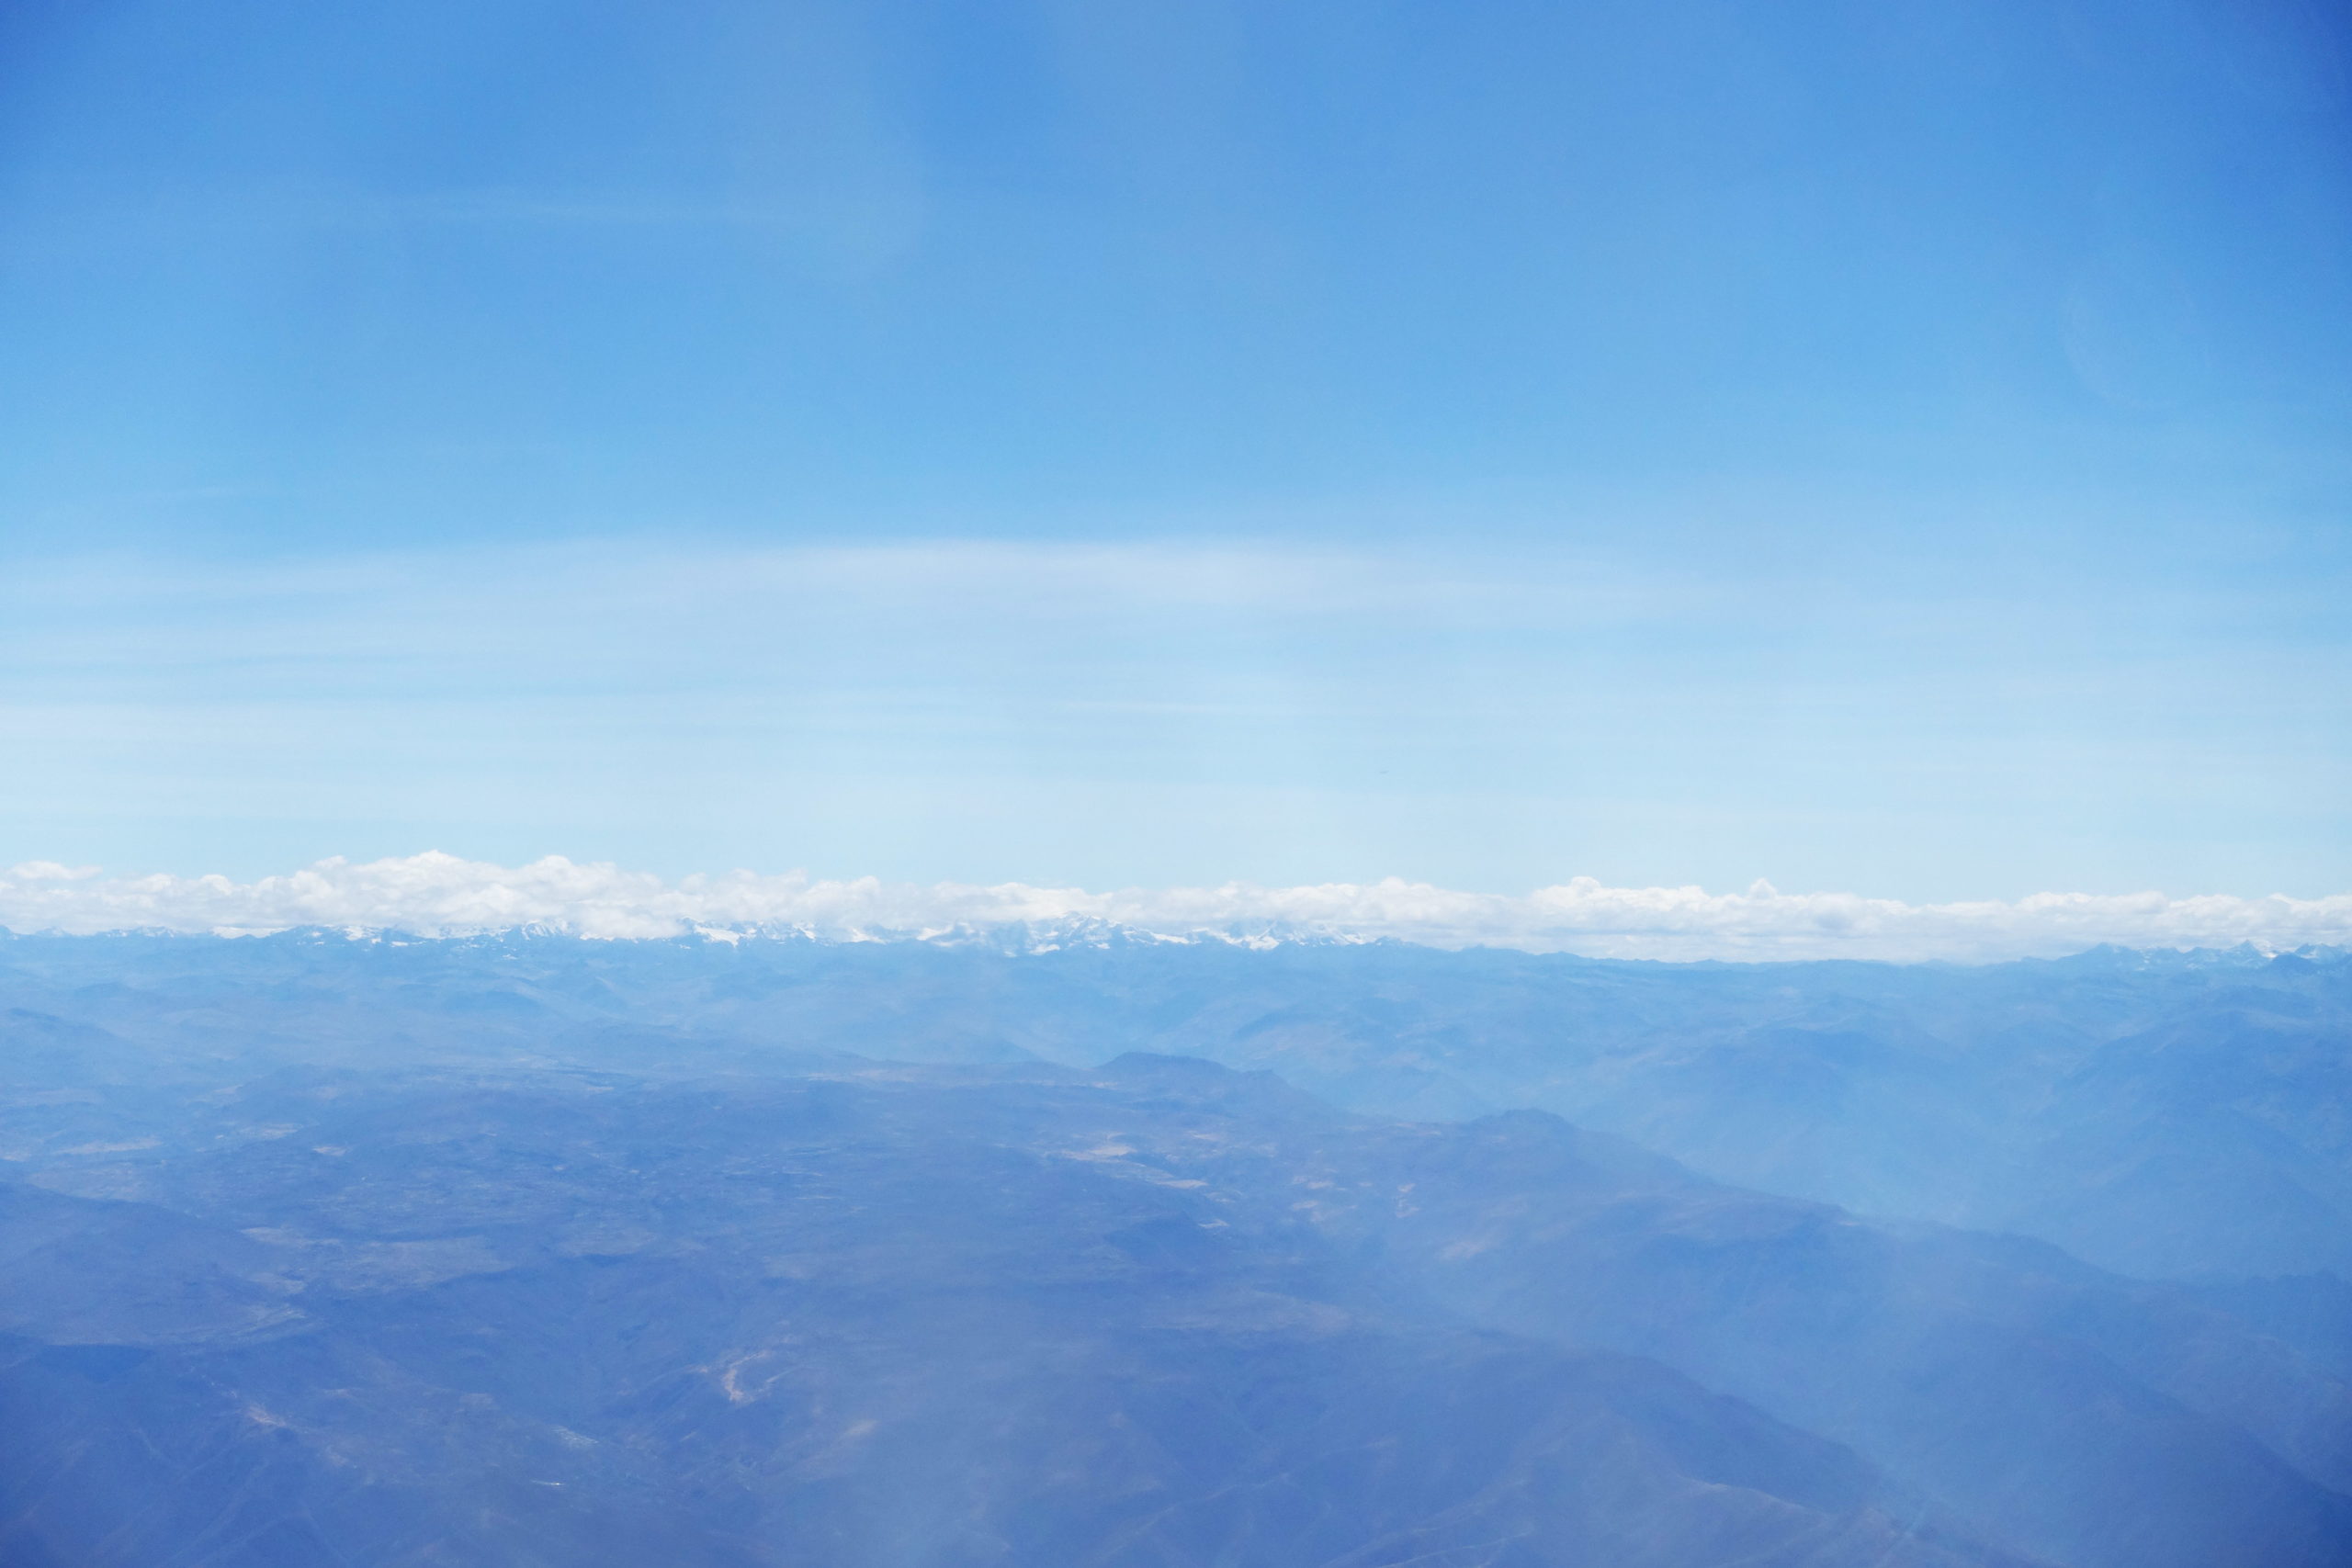 High above the Andes Mountains.